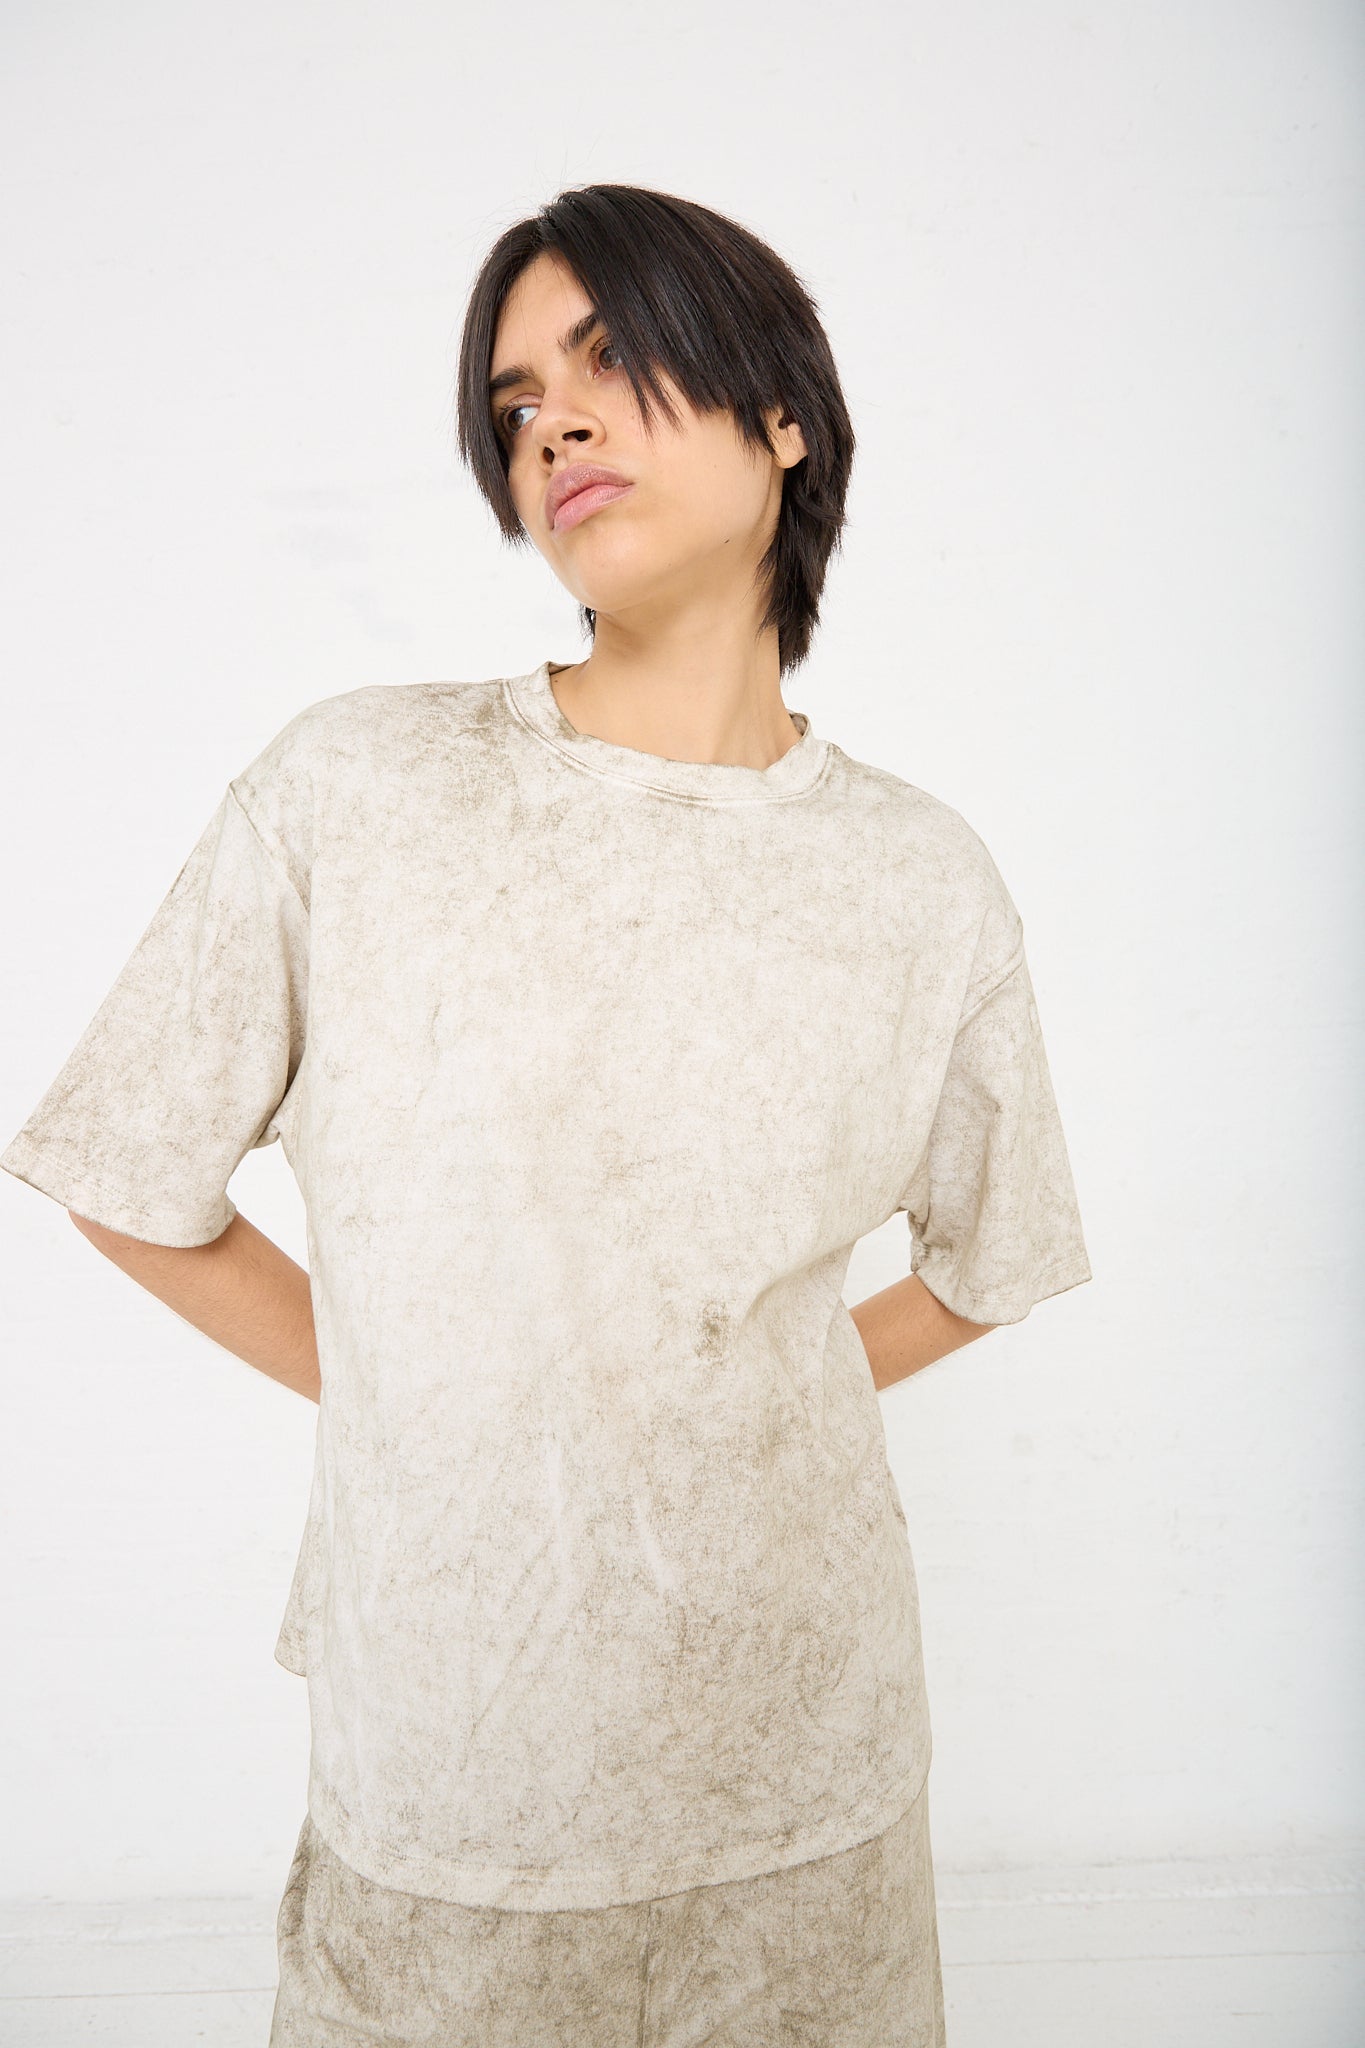 The model is wearing an oversized Pima Cotton Lunar Tee in Olive with a boxy silhouette by Lauren Manoogian. Front view.